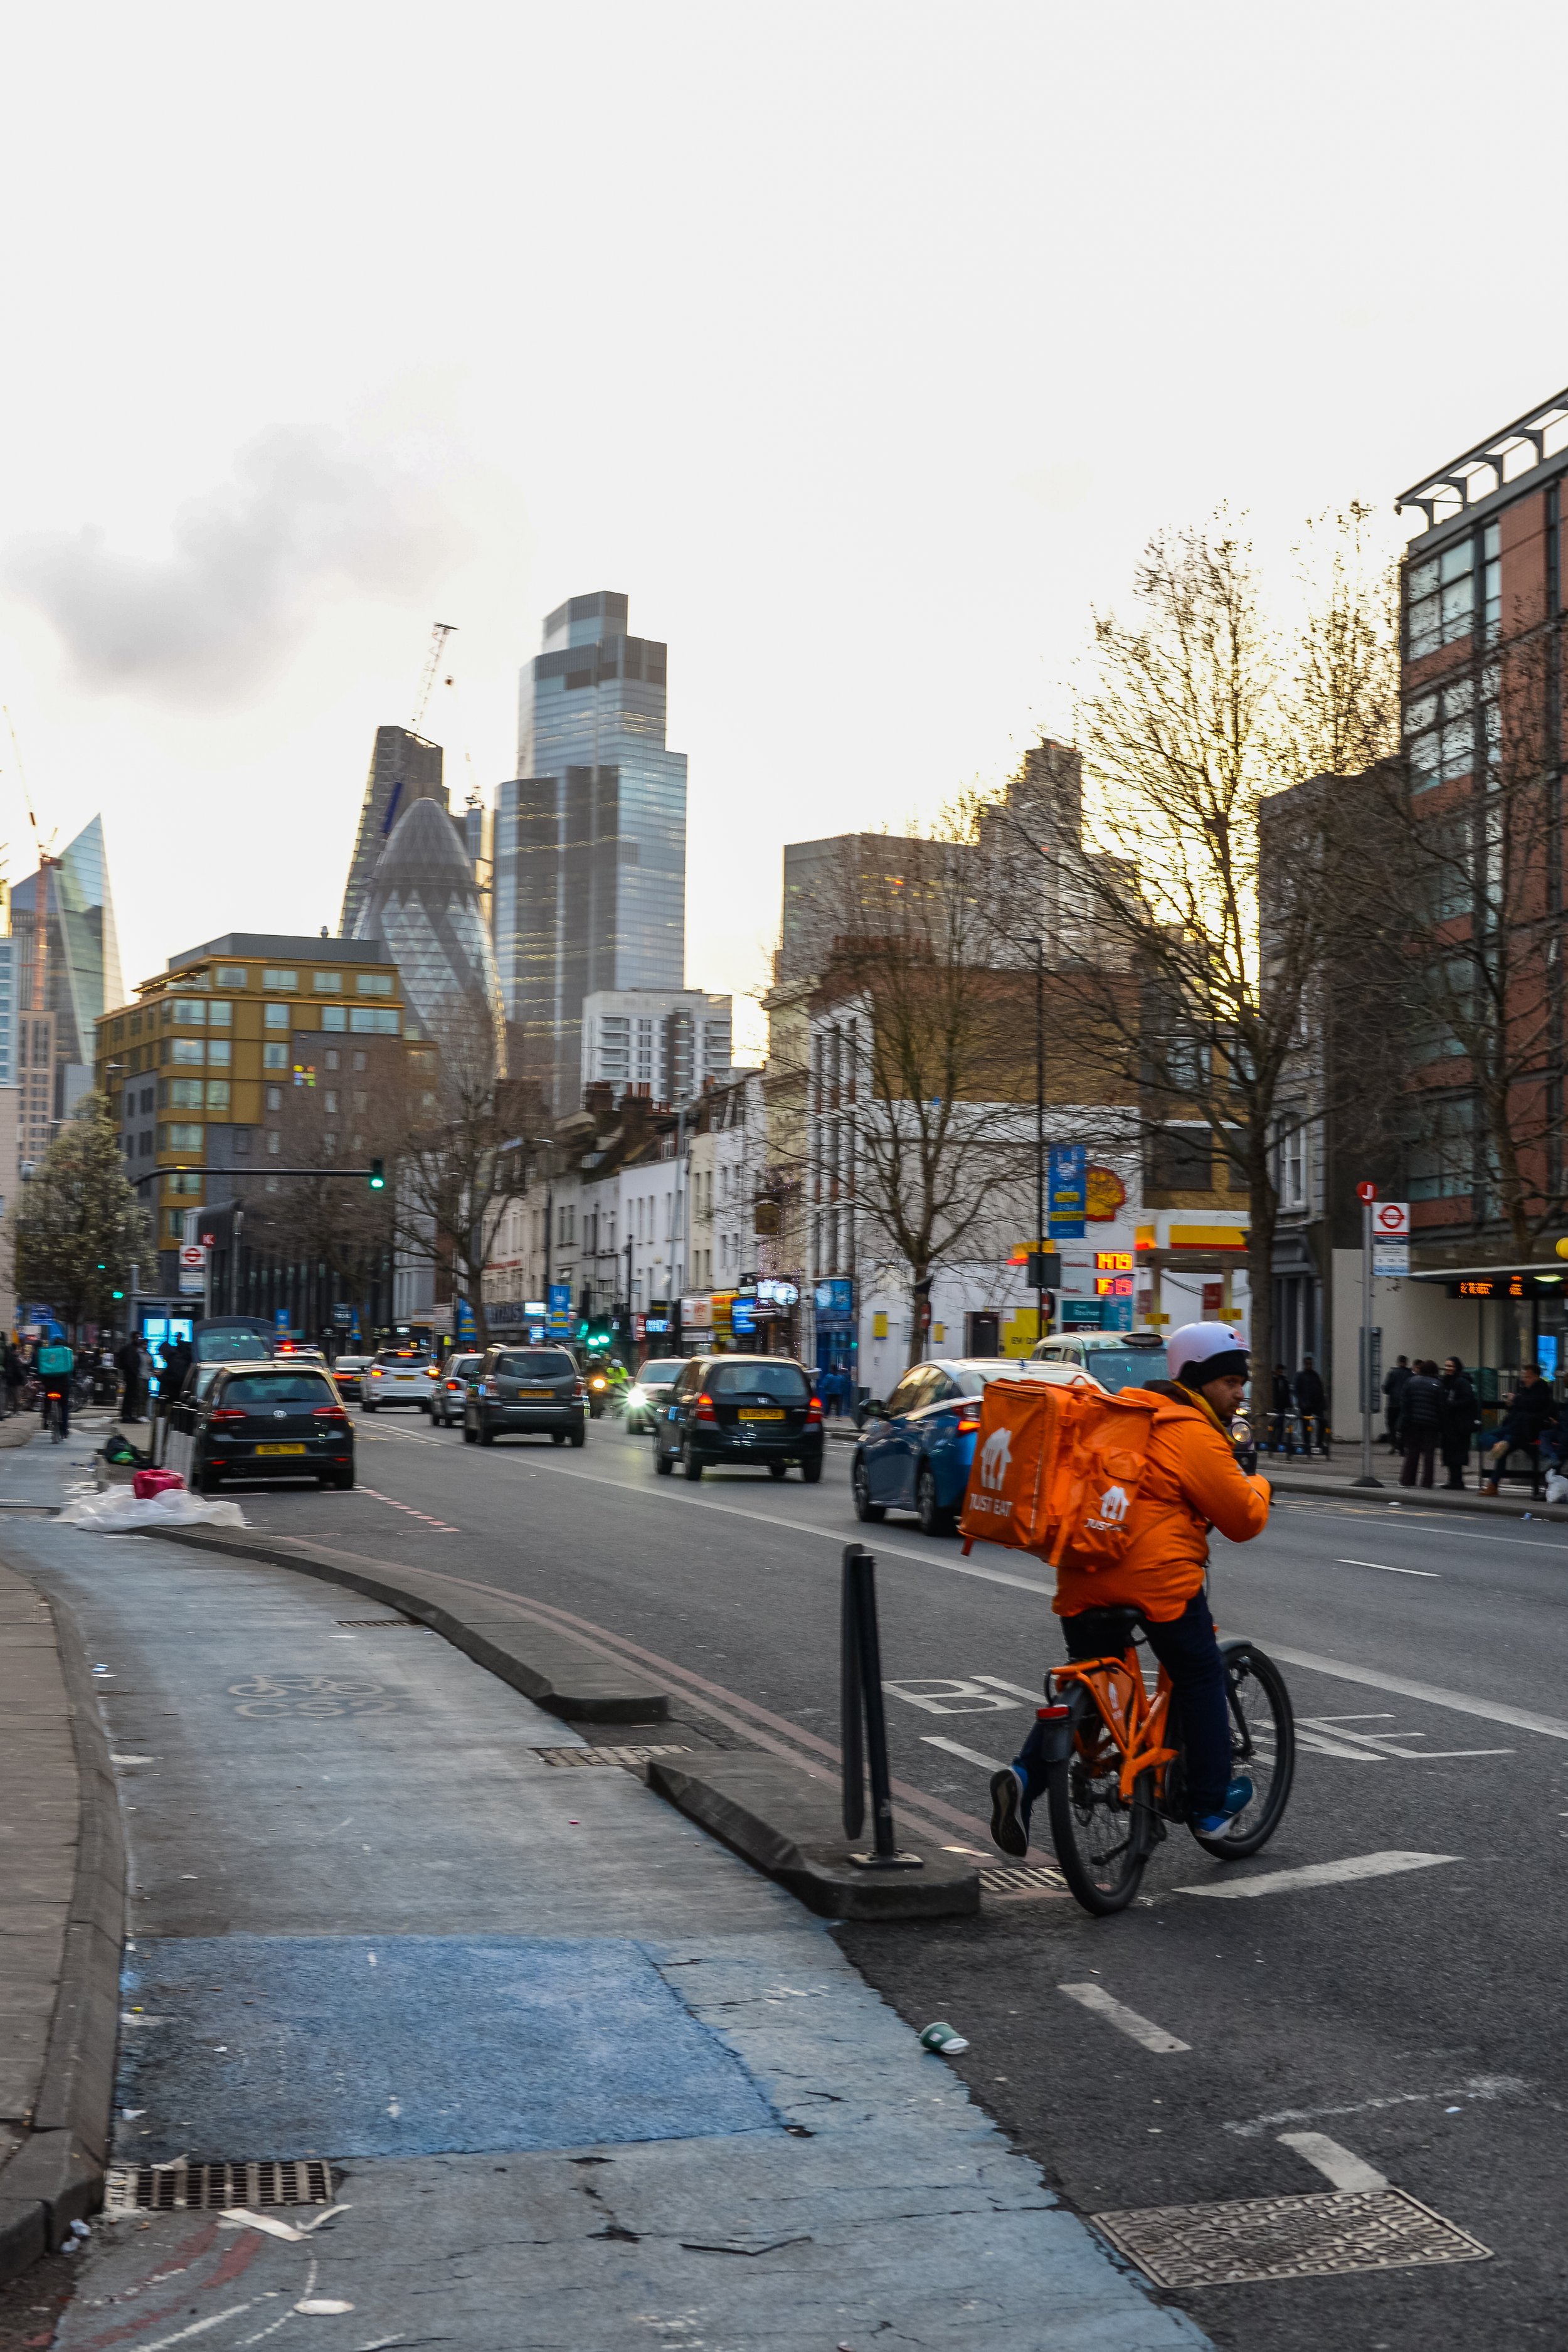  In Whitechapel, one of London's densest areas for restaurants and takeaways, delivery riders have become a common sight, transforming the area into a hub of cycling and street socialising.   Delivery apps like Just Eat, Deliveroo and UberEats have r